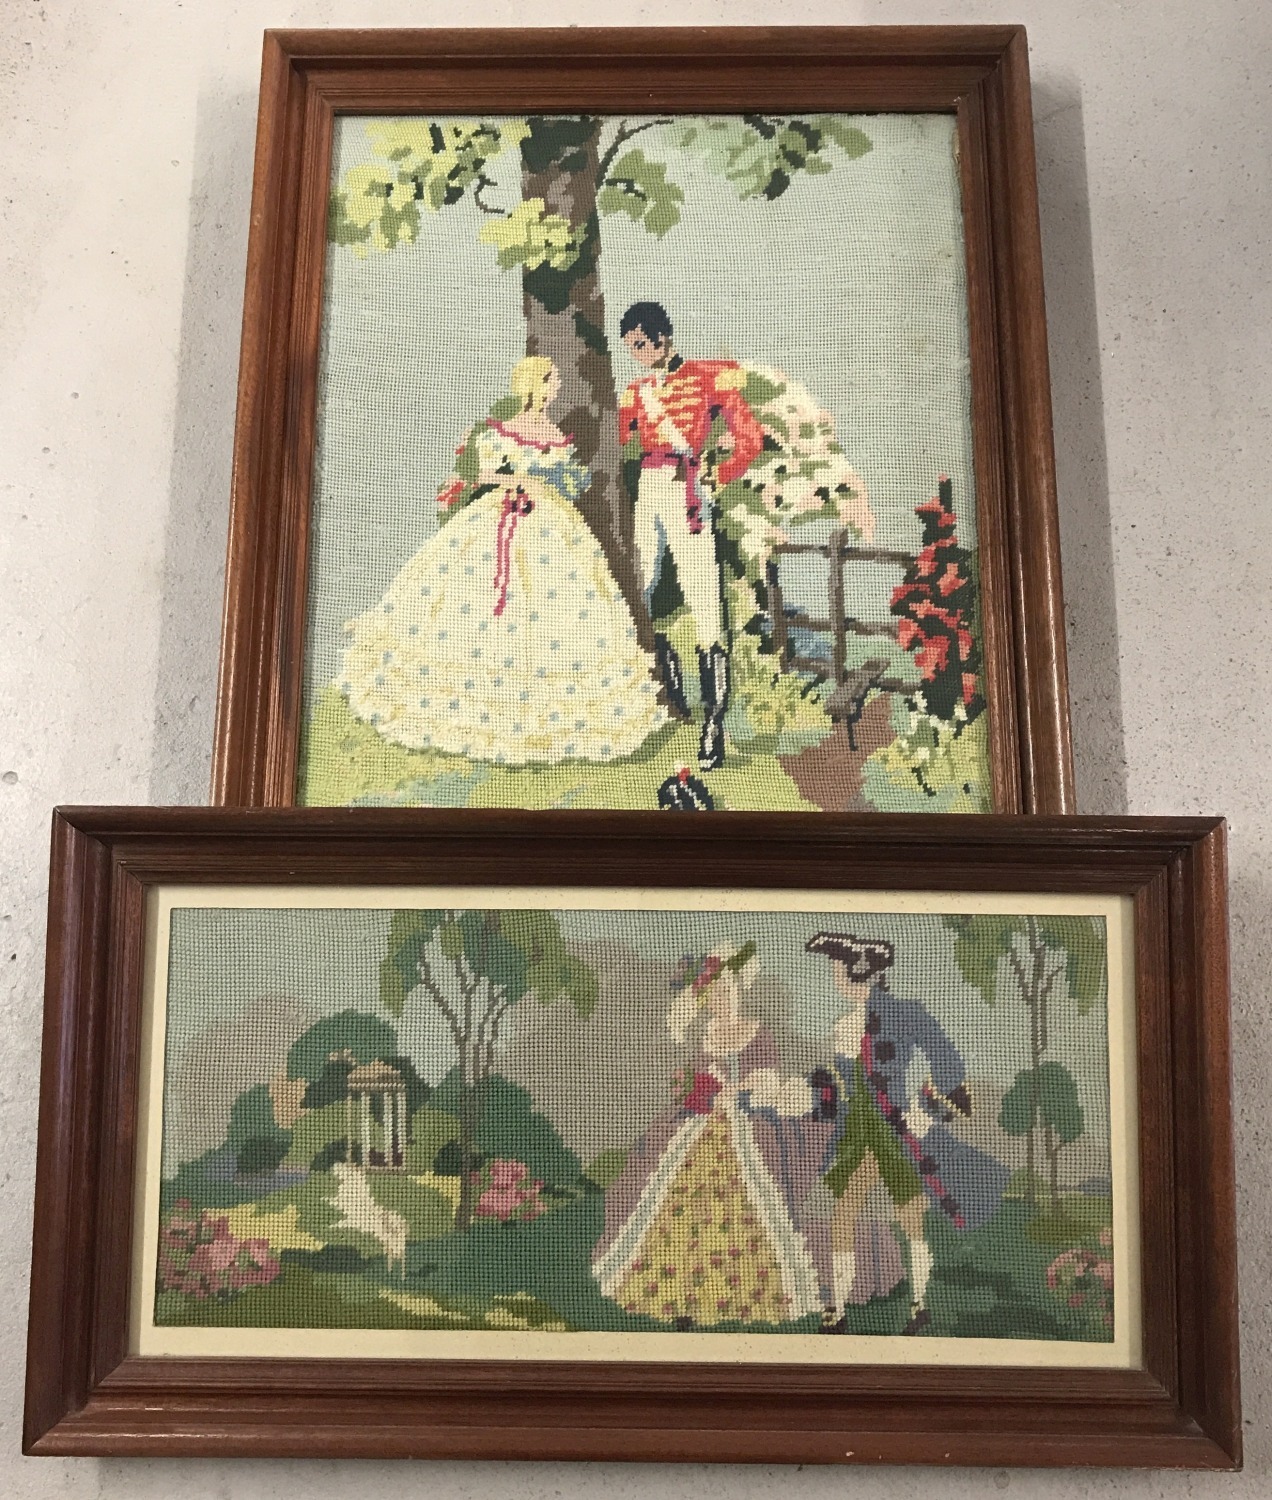 2 framed and glazed tapestry pictures. Both depicting couples in period dress.